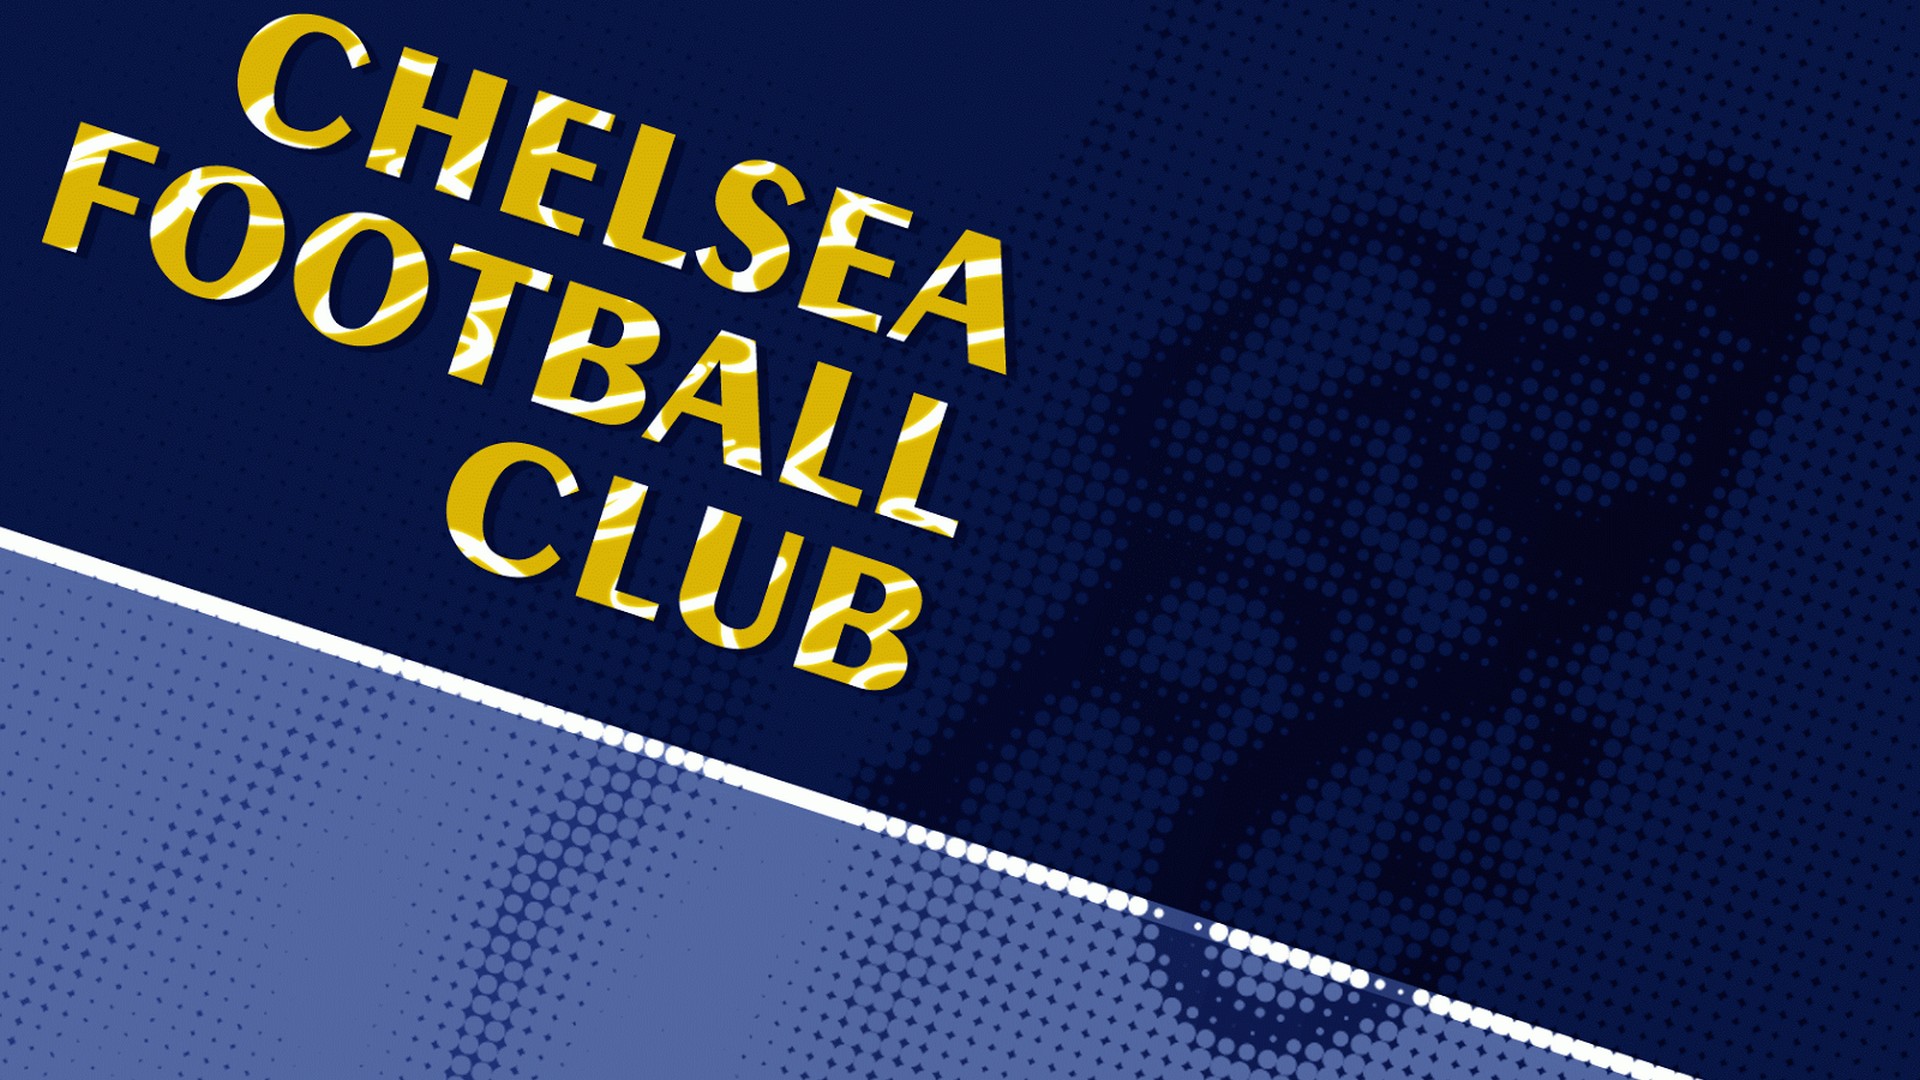 Chelsea HD Wallpapers With Resolution 1920X1080 pixel. You can make this wallpaper for your Mac or Windows Desktop Background, iPhone, Android or Tablet and another Smartphone device for free